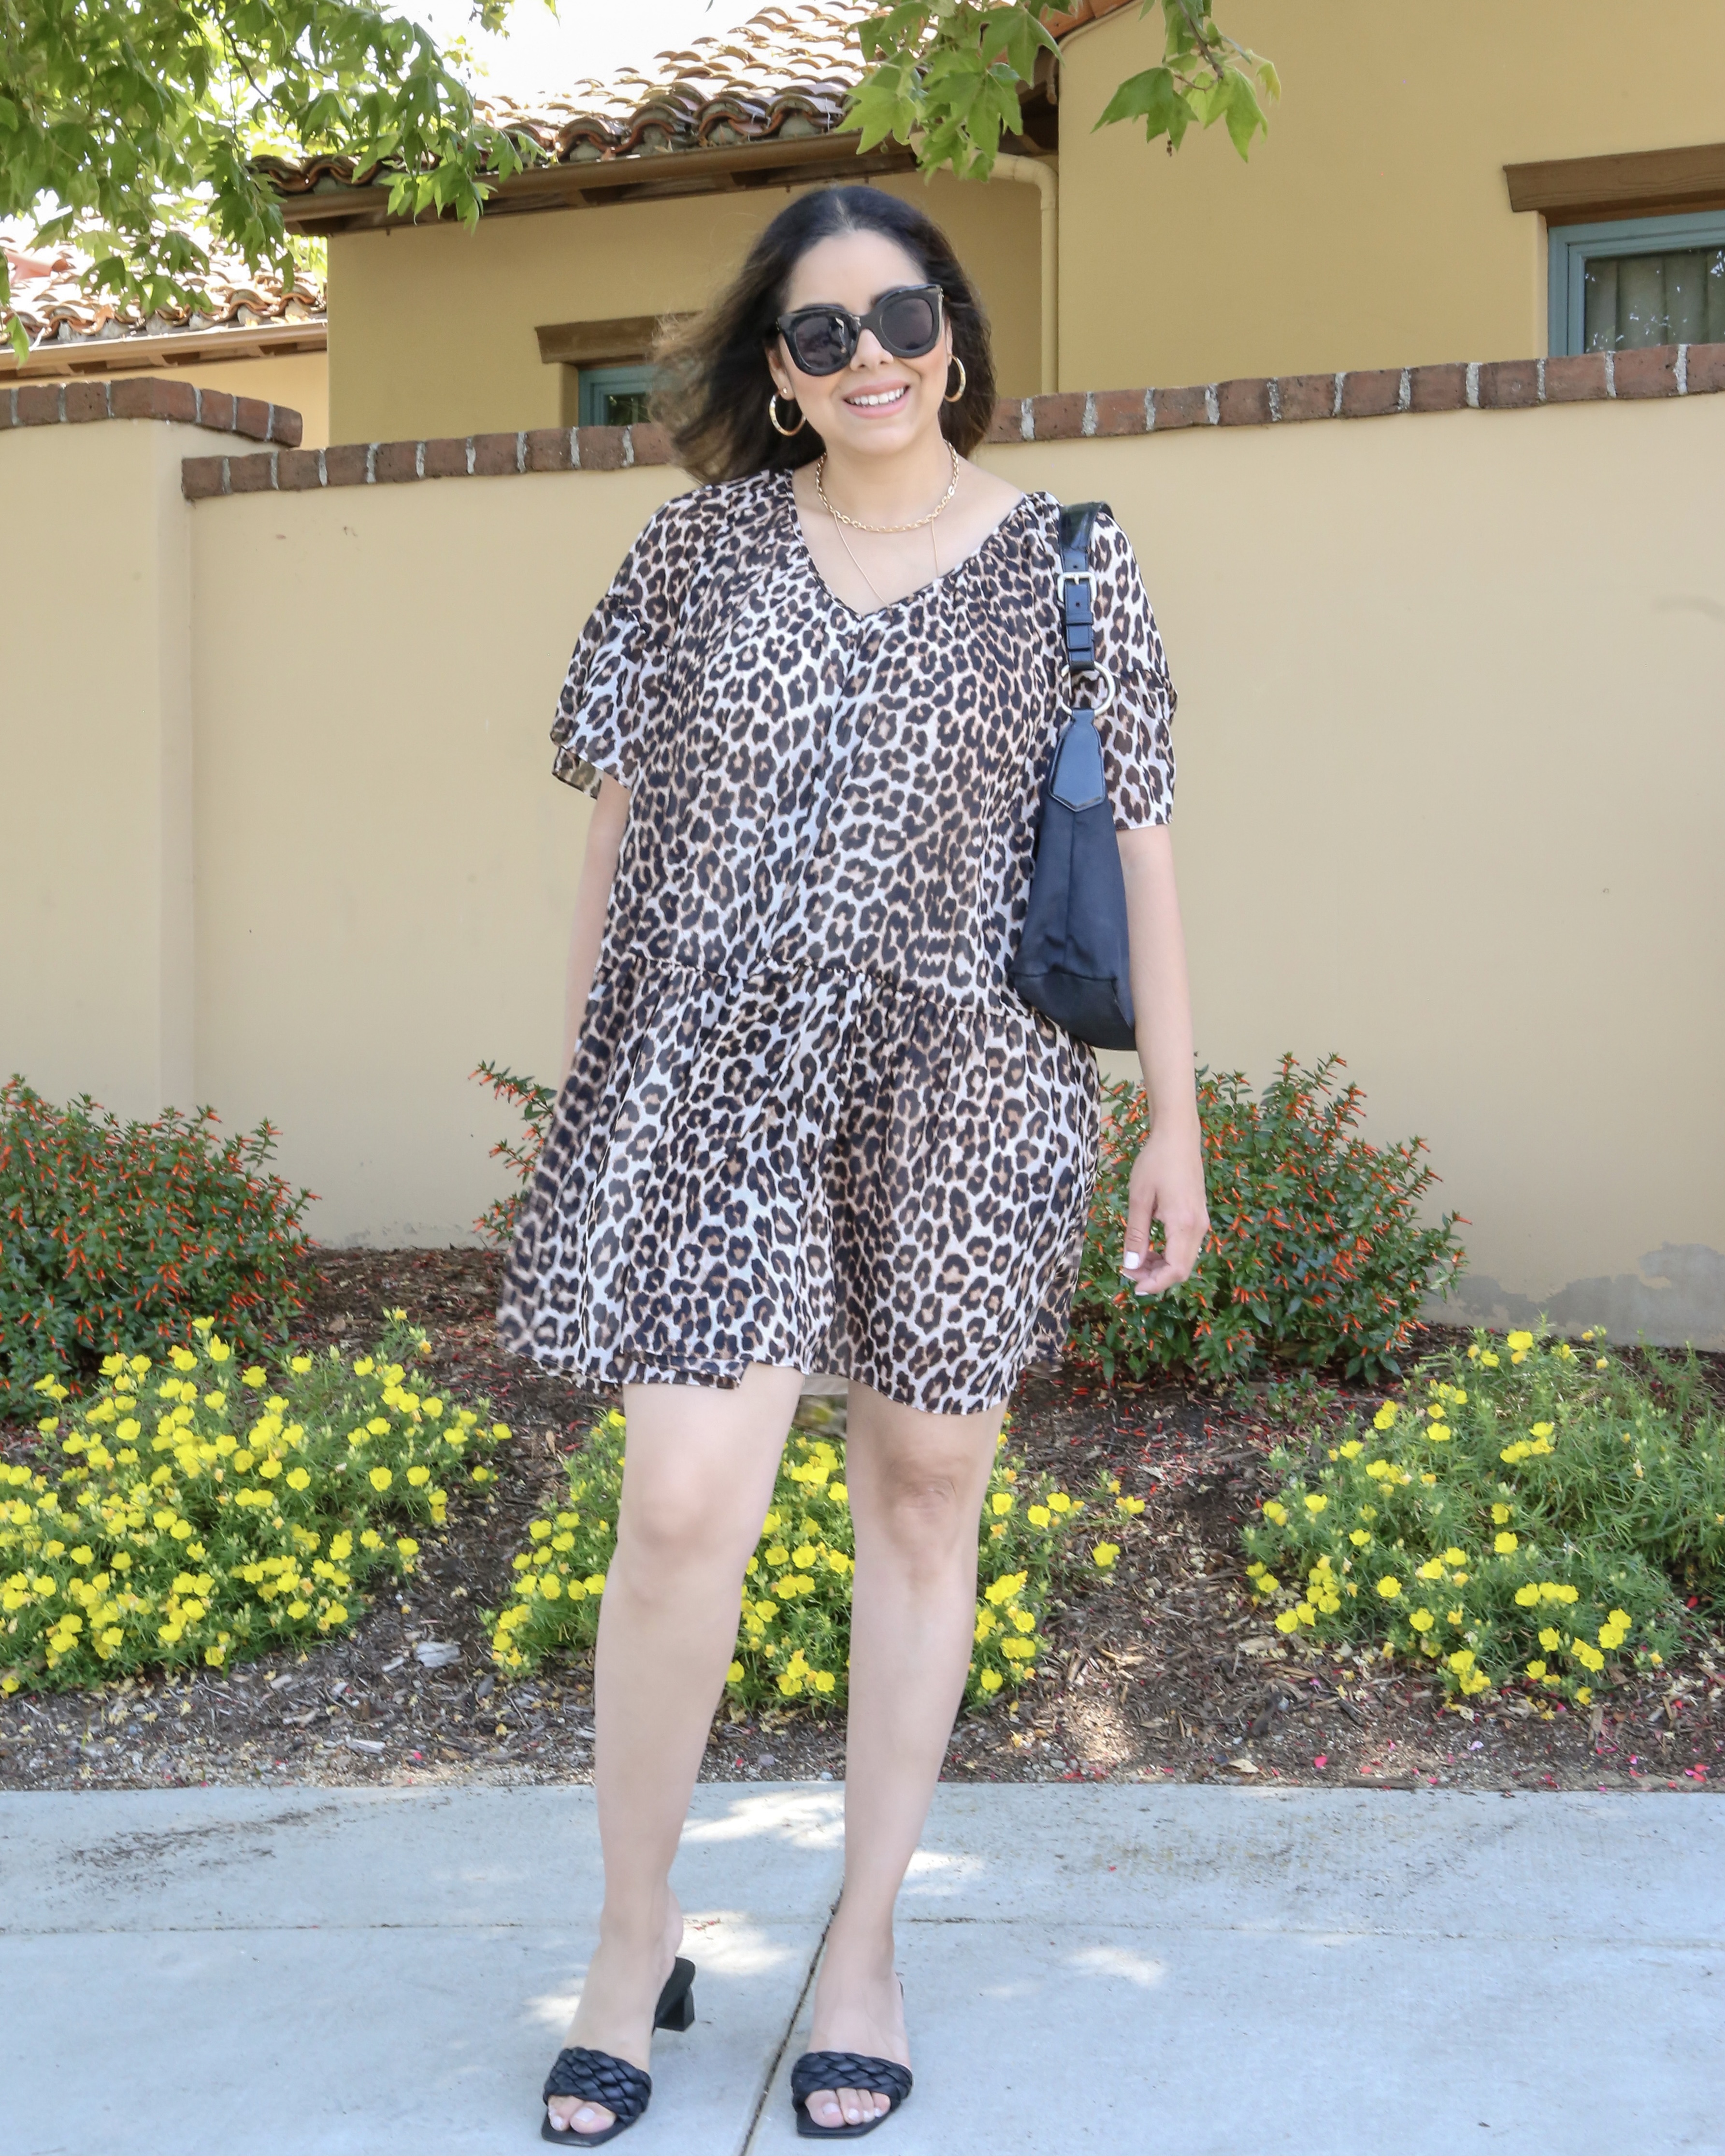 Affordable summer fashion, San Diego Influencers, attainable style in San Diego